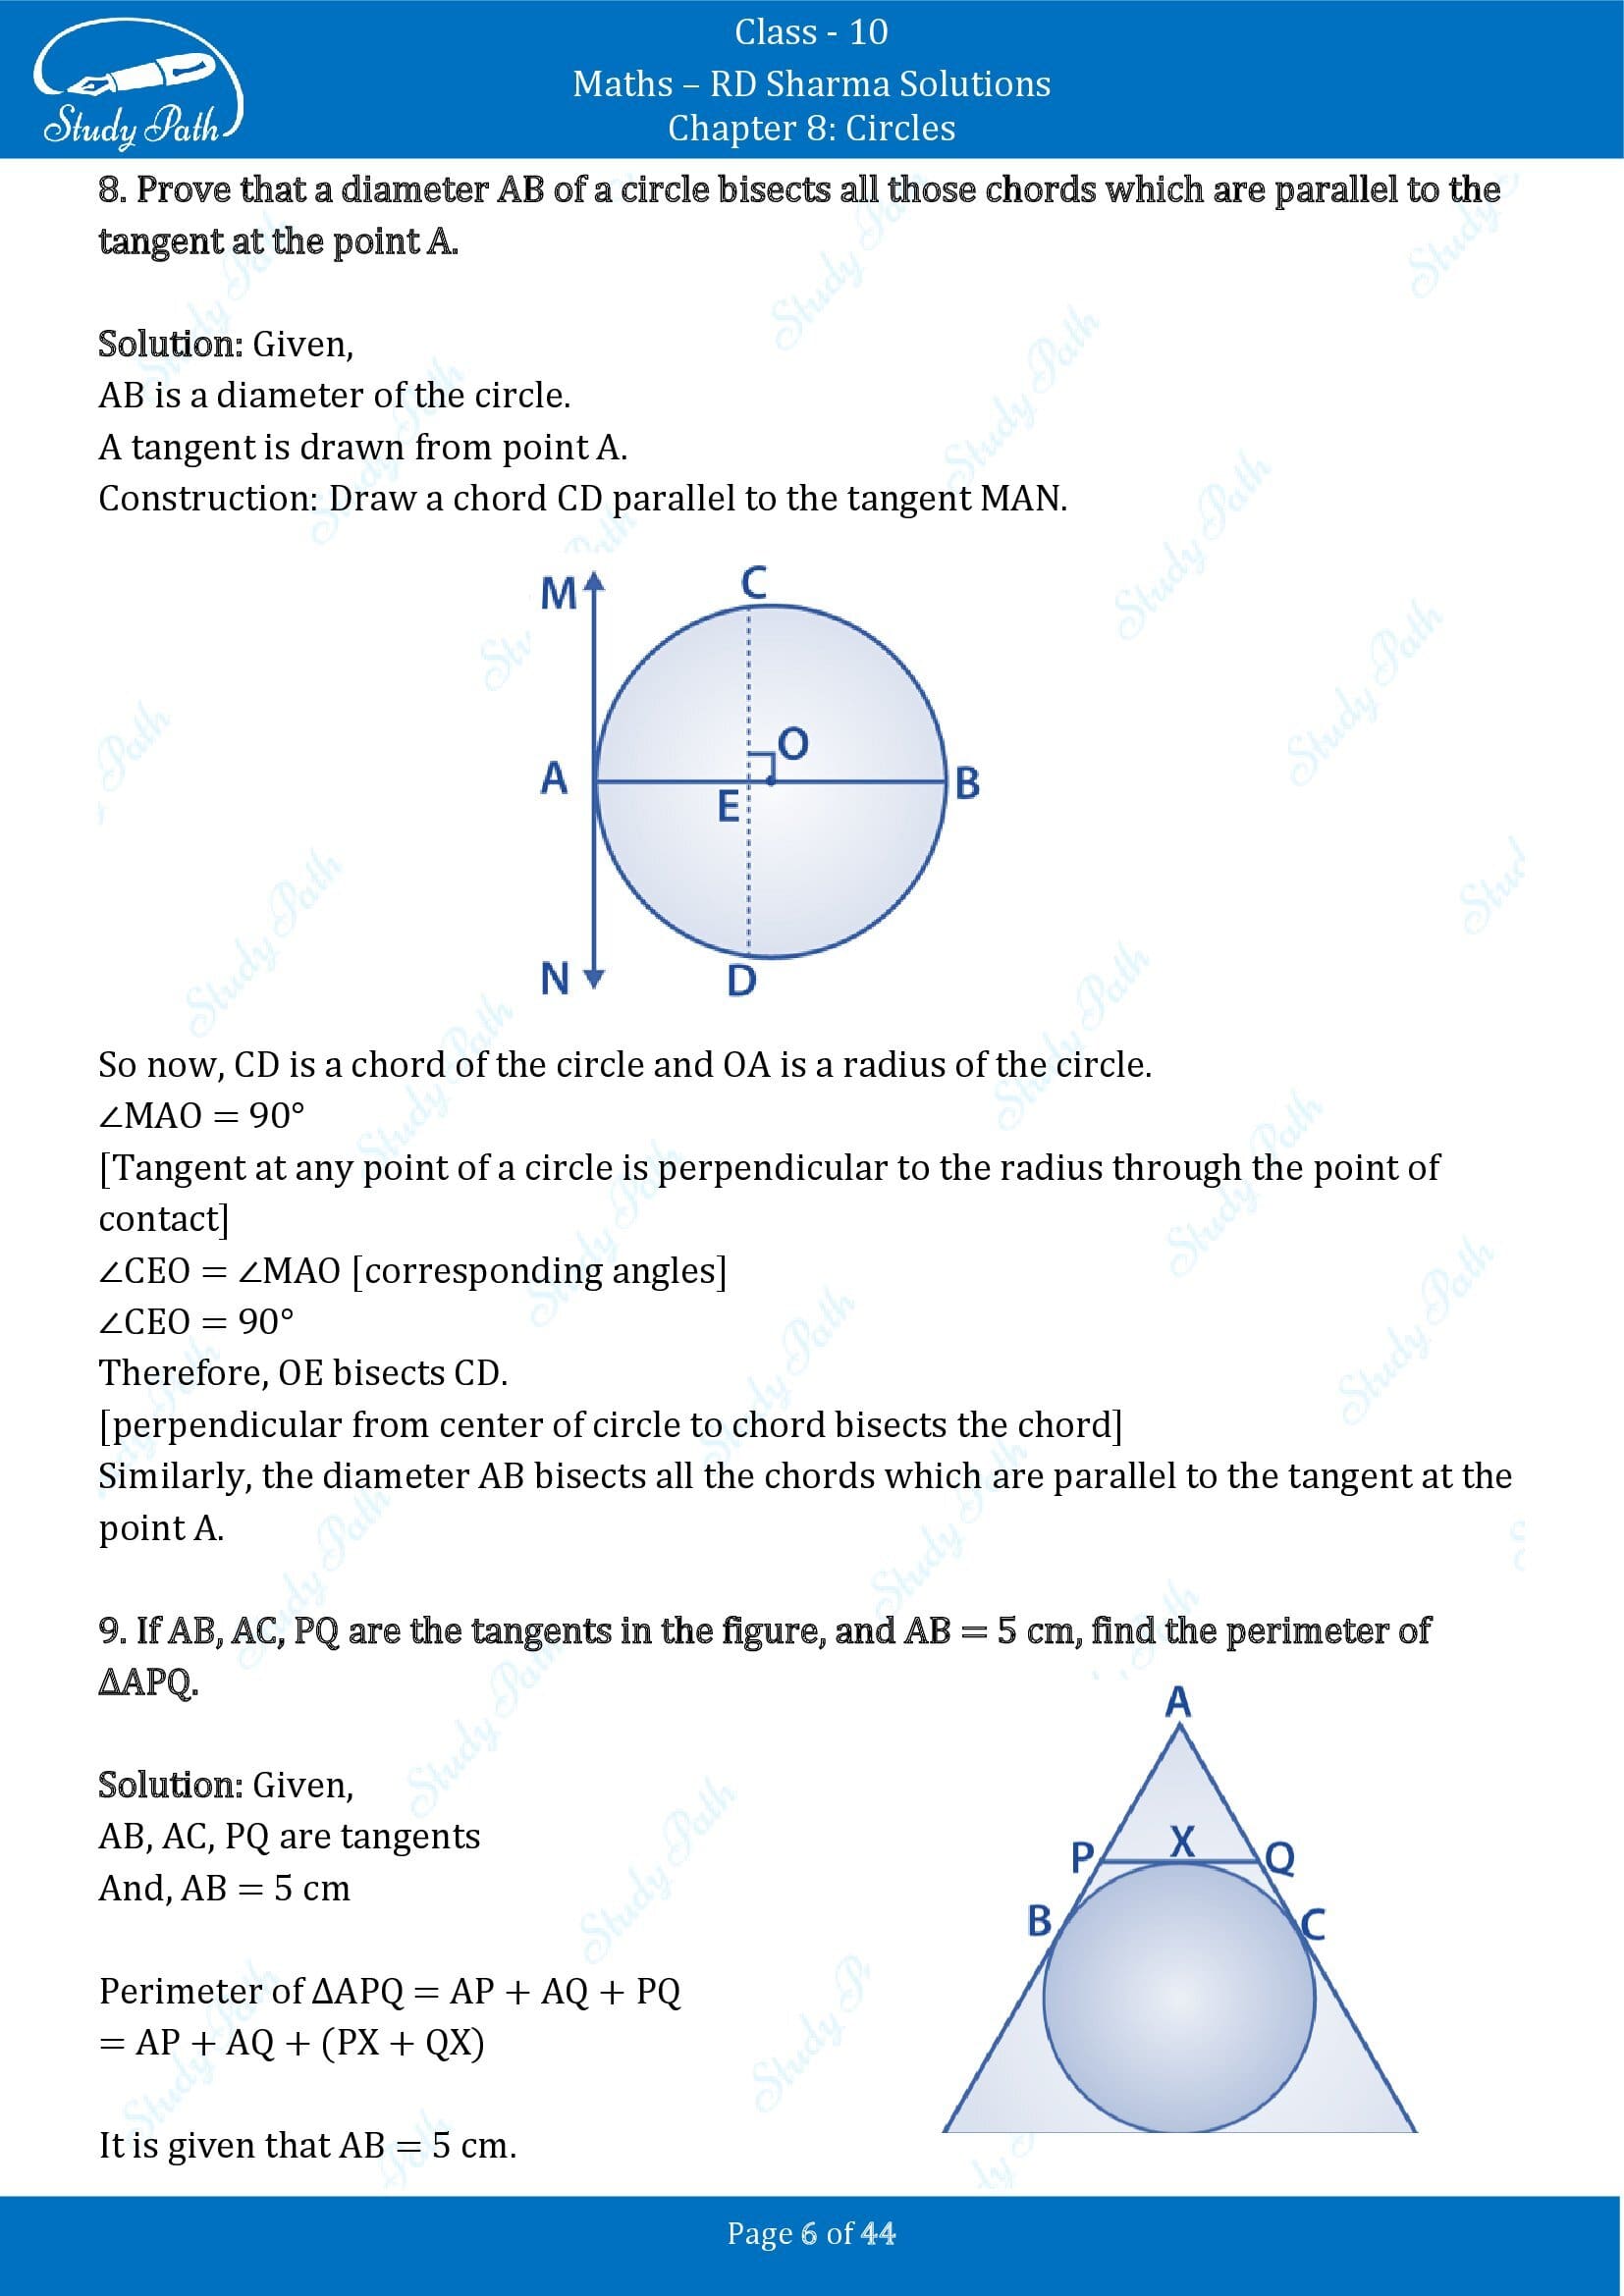 RD Sharma Solutions Class 10 Chapter 8 Circles Exercise 8.2 00006